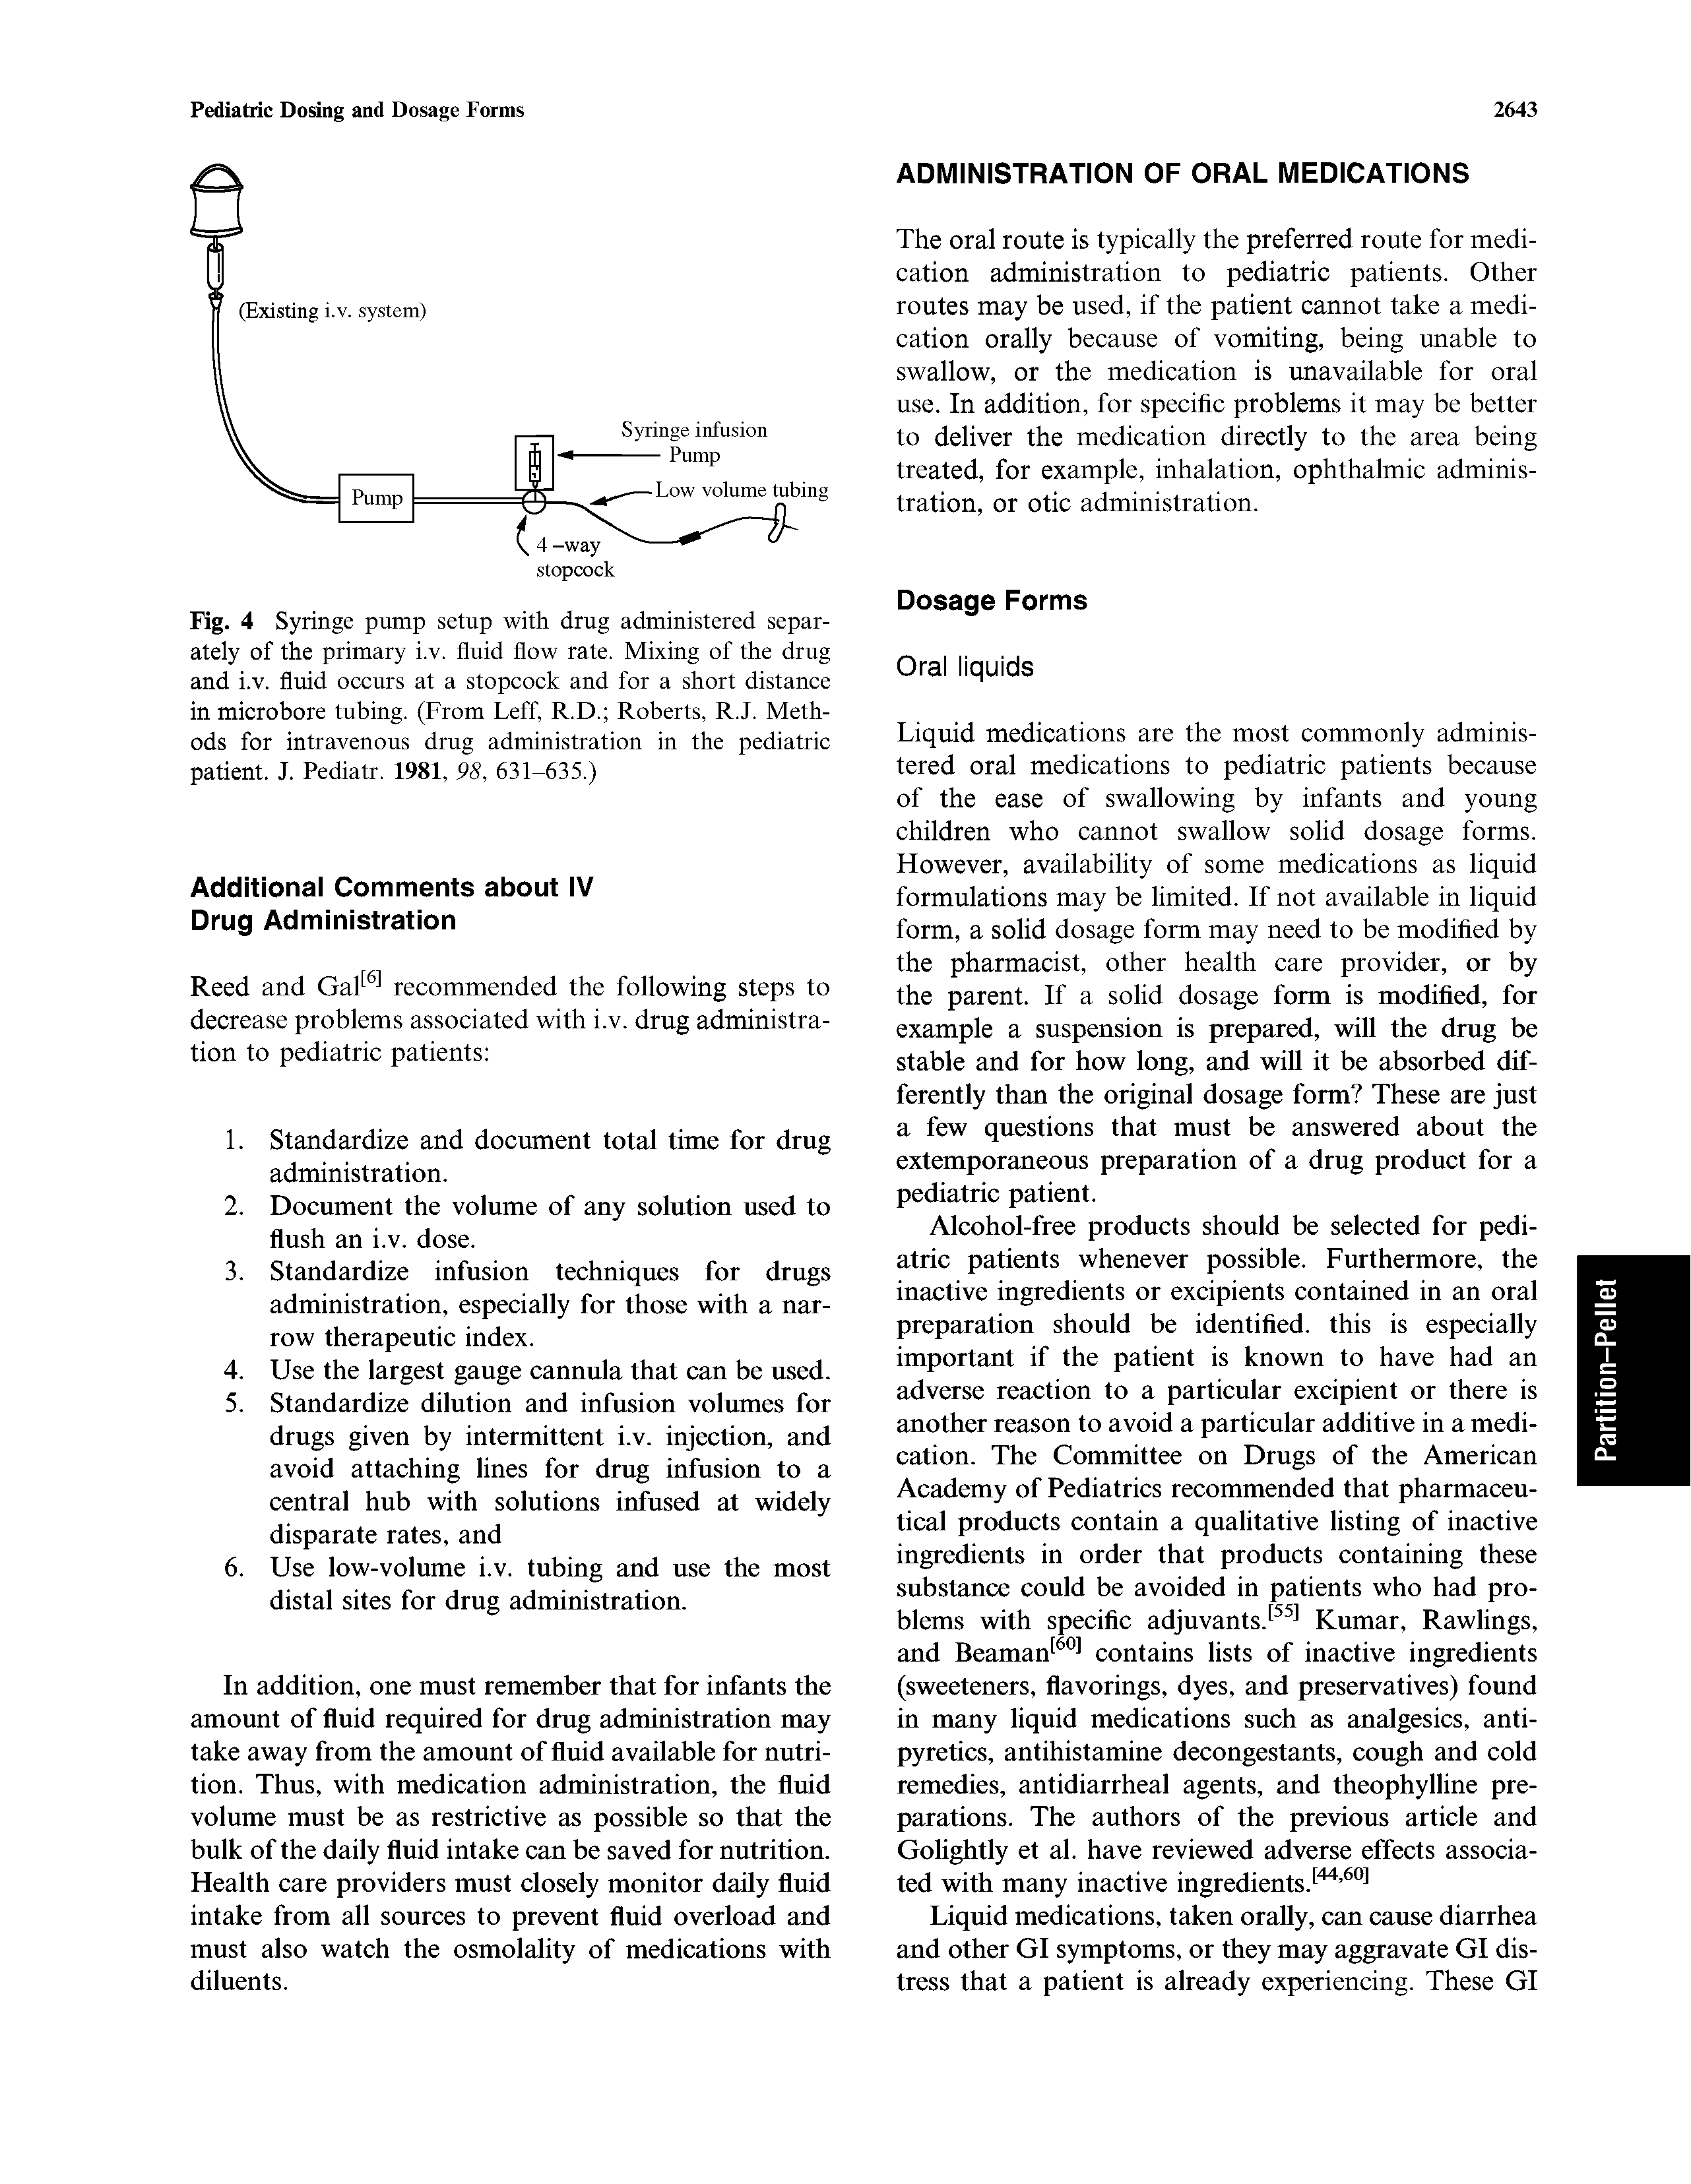 Fig. 4 Syringe pump setup with drug administered separately of the primary i.v. fluid flow rate. Mixing of the drug and i.v. fluid occurs at a stopcock and for a short distance in microbore tubing. (From Leff, R.D. Roberts, R.J. Methods for intravenous drug administration in the pediatric patient. J. Pediatr. 1981, 98, 631-635.)...